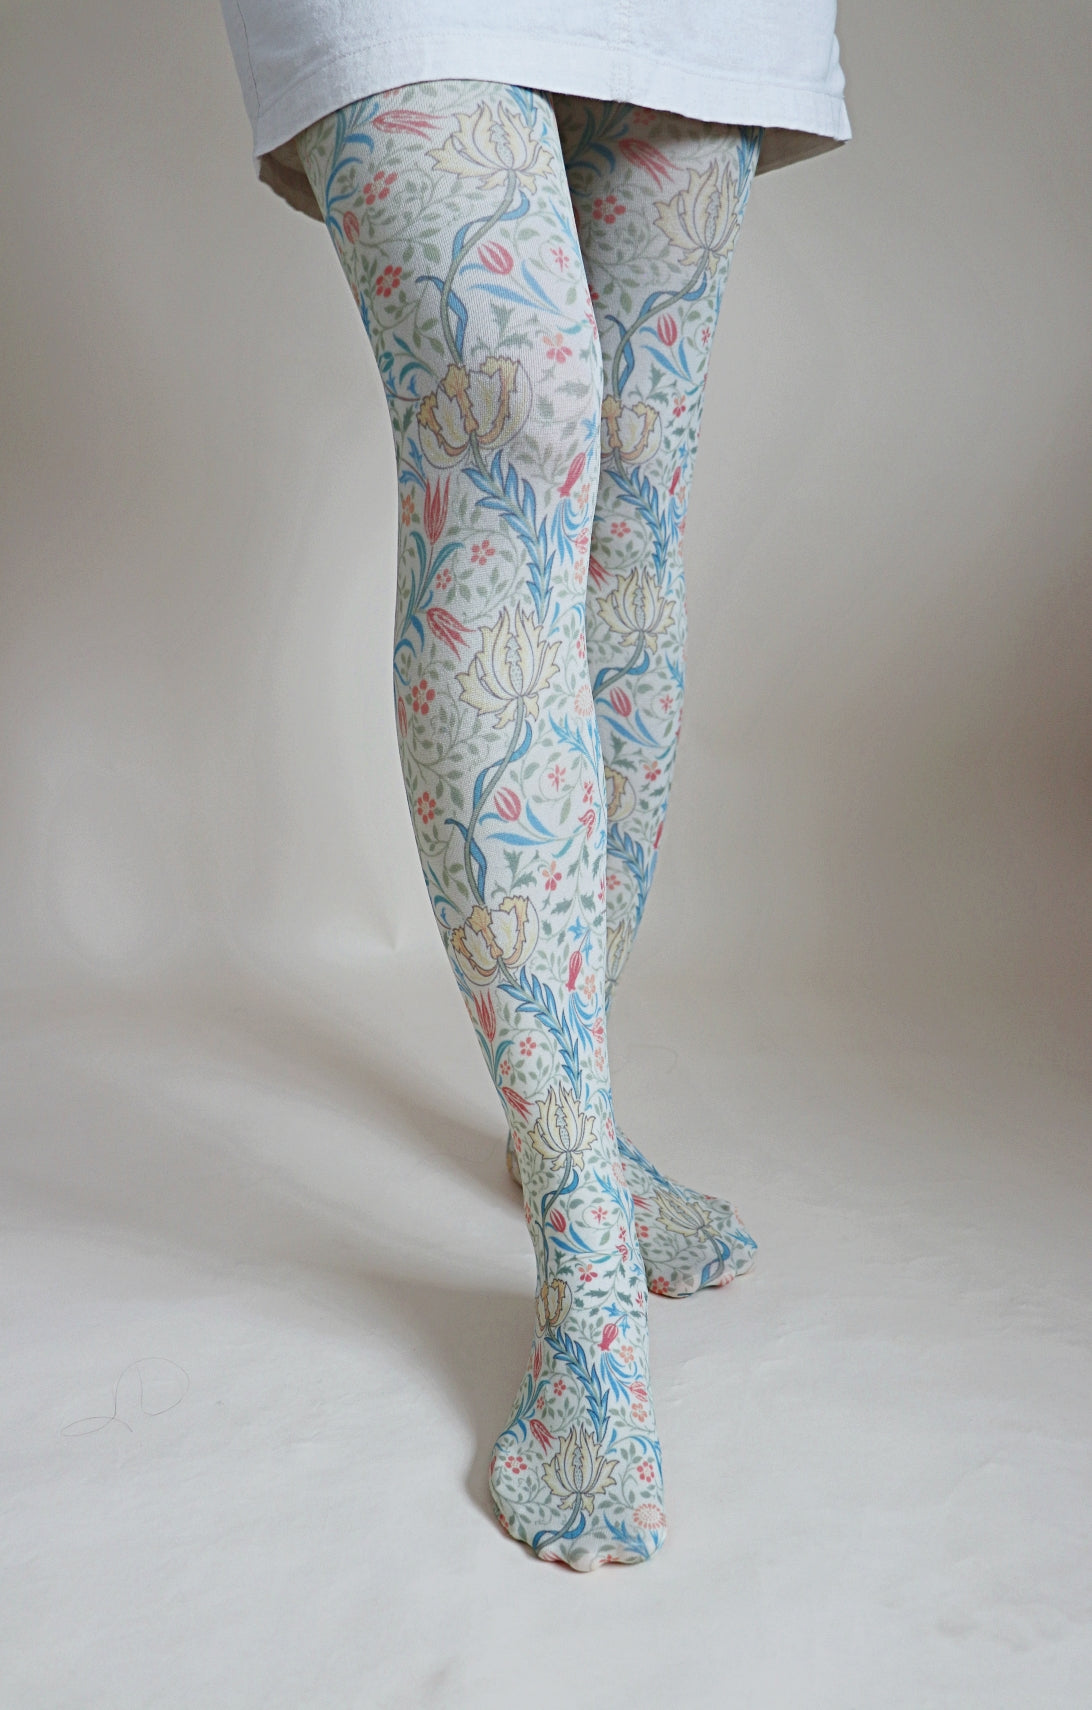 Tights called Flora from the William Morris collection of the TABBISOCKS brand, with a unique red and yellow plant pattern throughout, in antique-looking light blue and white colors